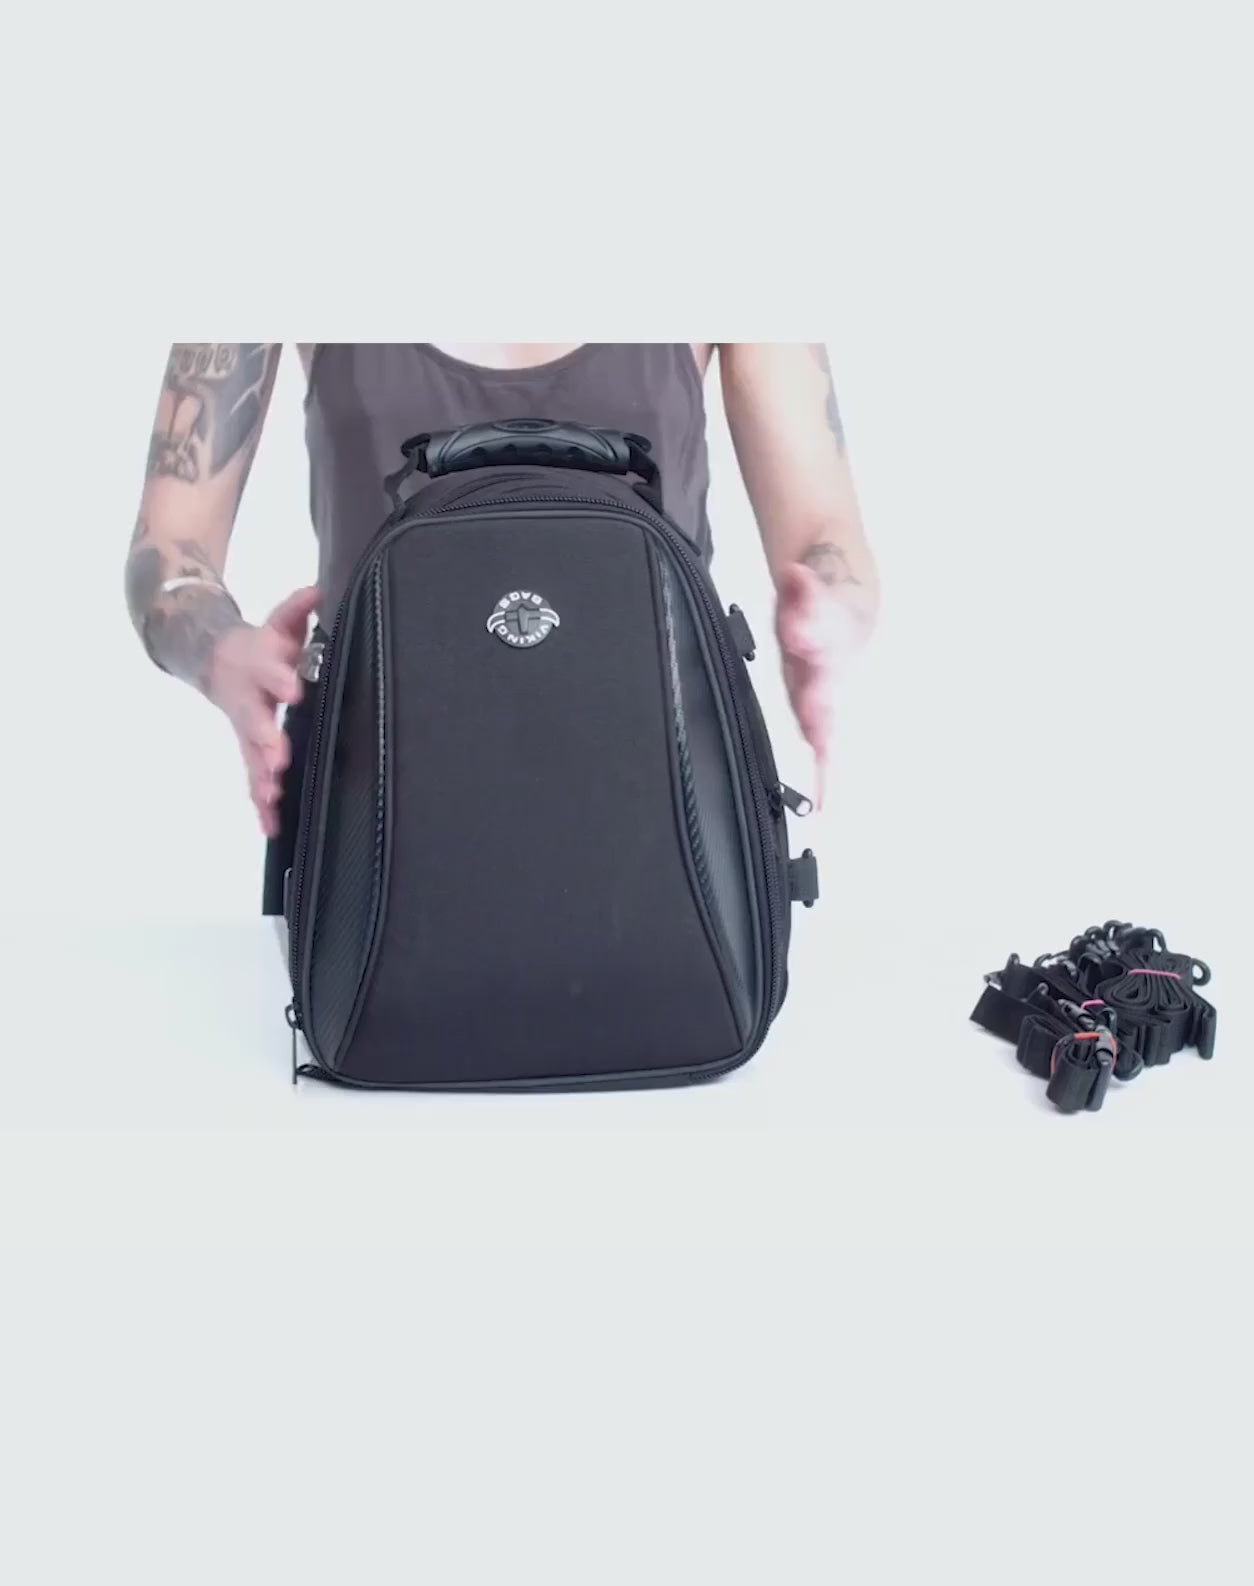 Luggage for Harley-Davidson Motorcycles - Rogue Rider Industries